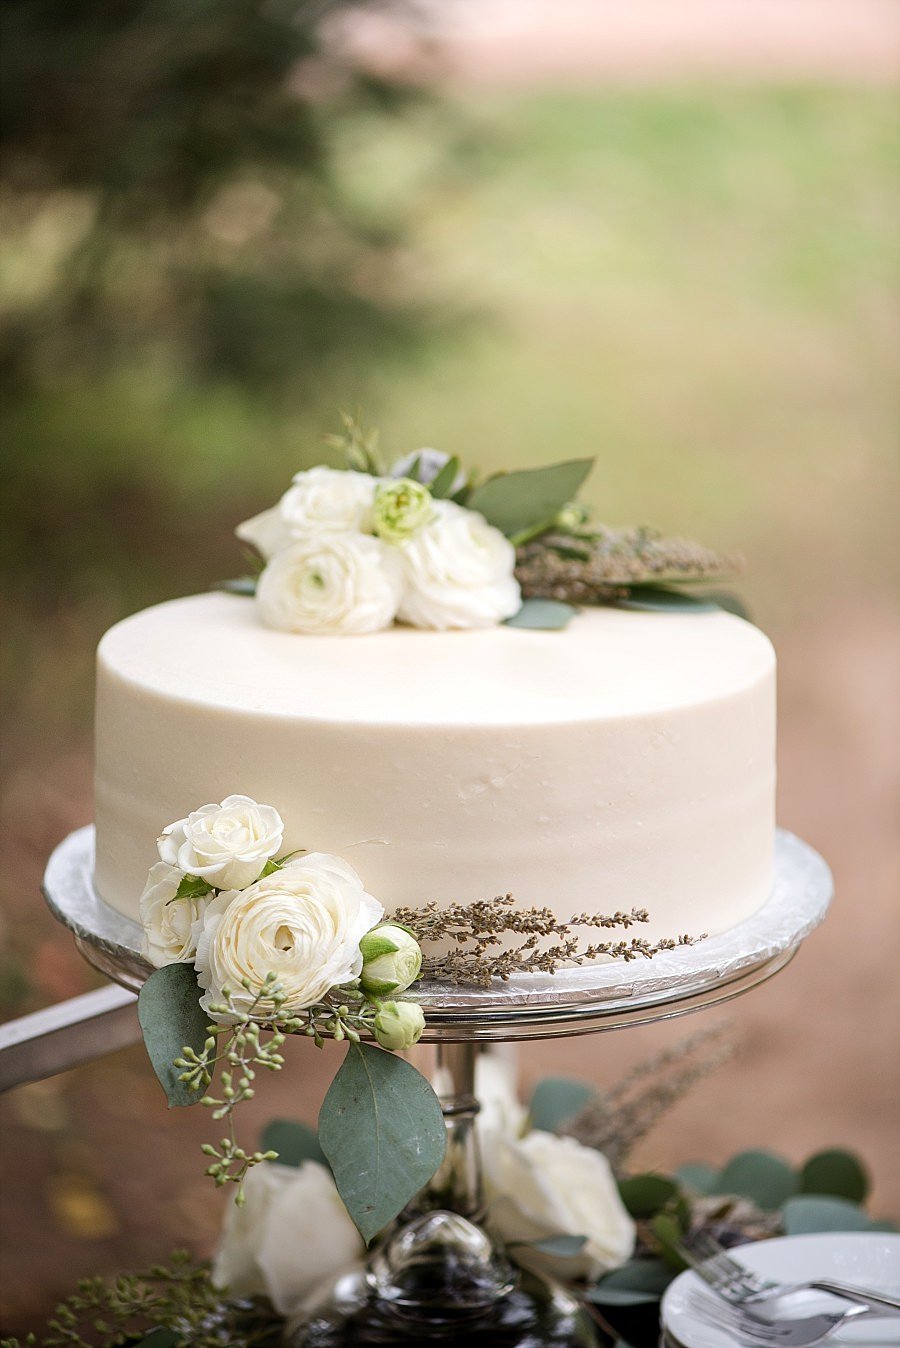 The low one tier wedding cake with white icing sits on a silver pedestal cake stand decorated with white ranunculus and greenery.